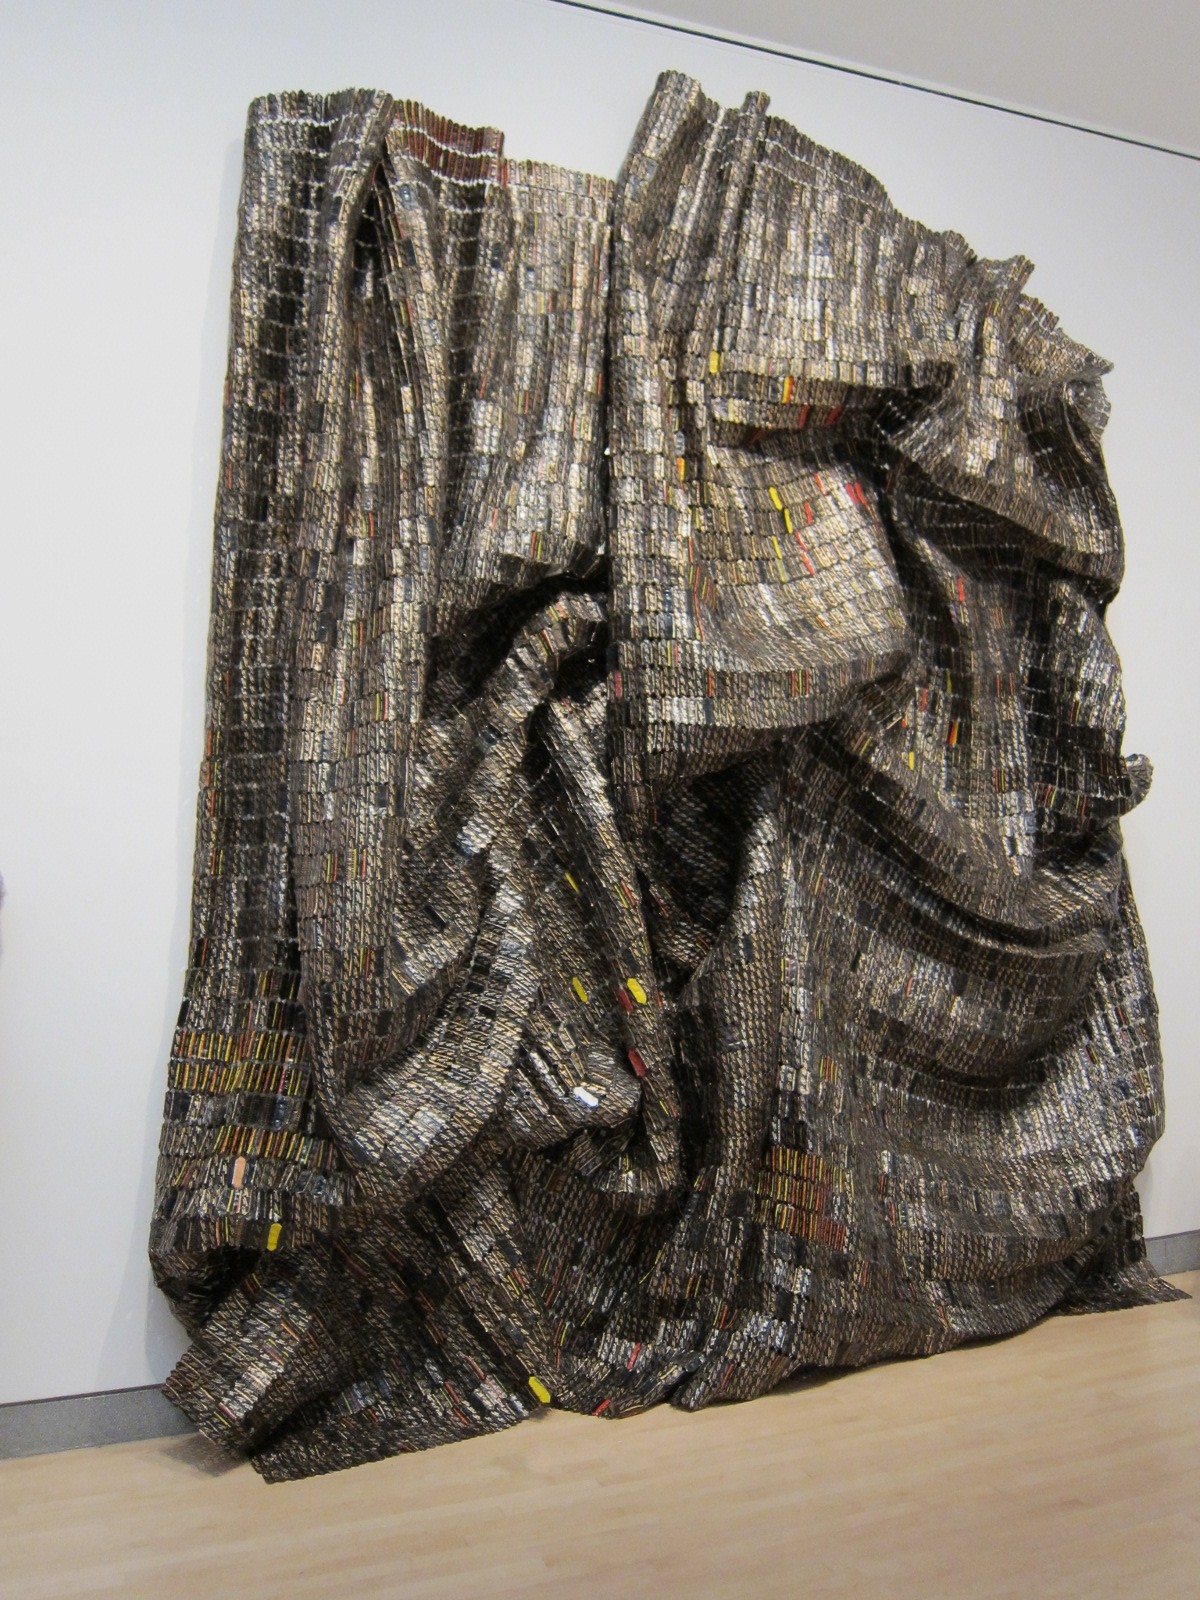 Museums: El Anatsui – “Gravity and Grace: Monumental Works” @ Brooklyn ...